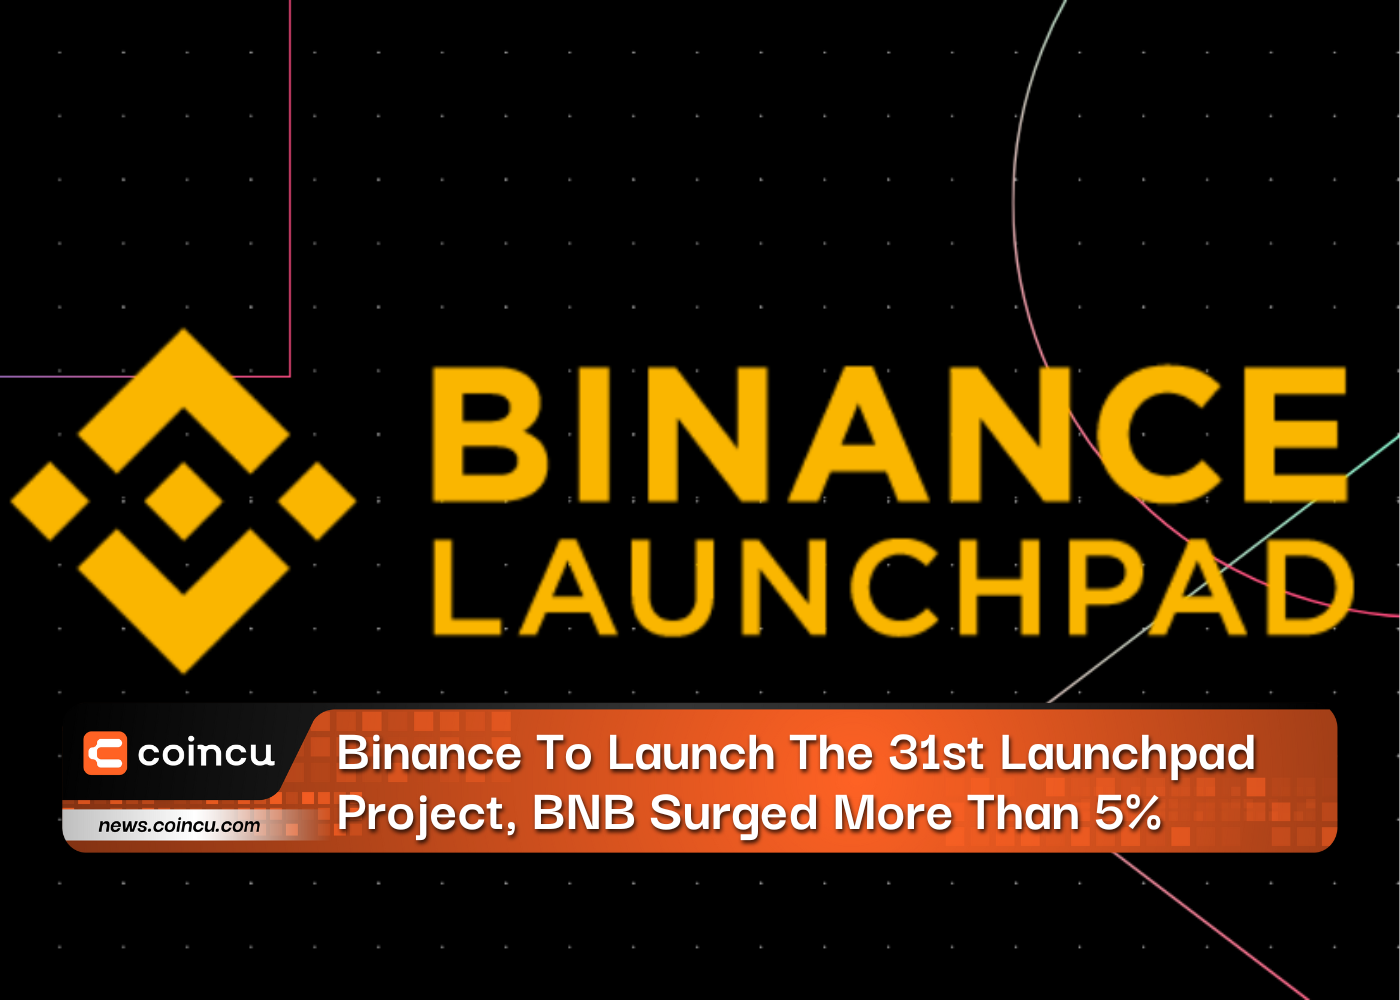 Binance To Launch The 31st Launchpad Project, BNB Surged More Than 5%